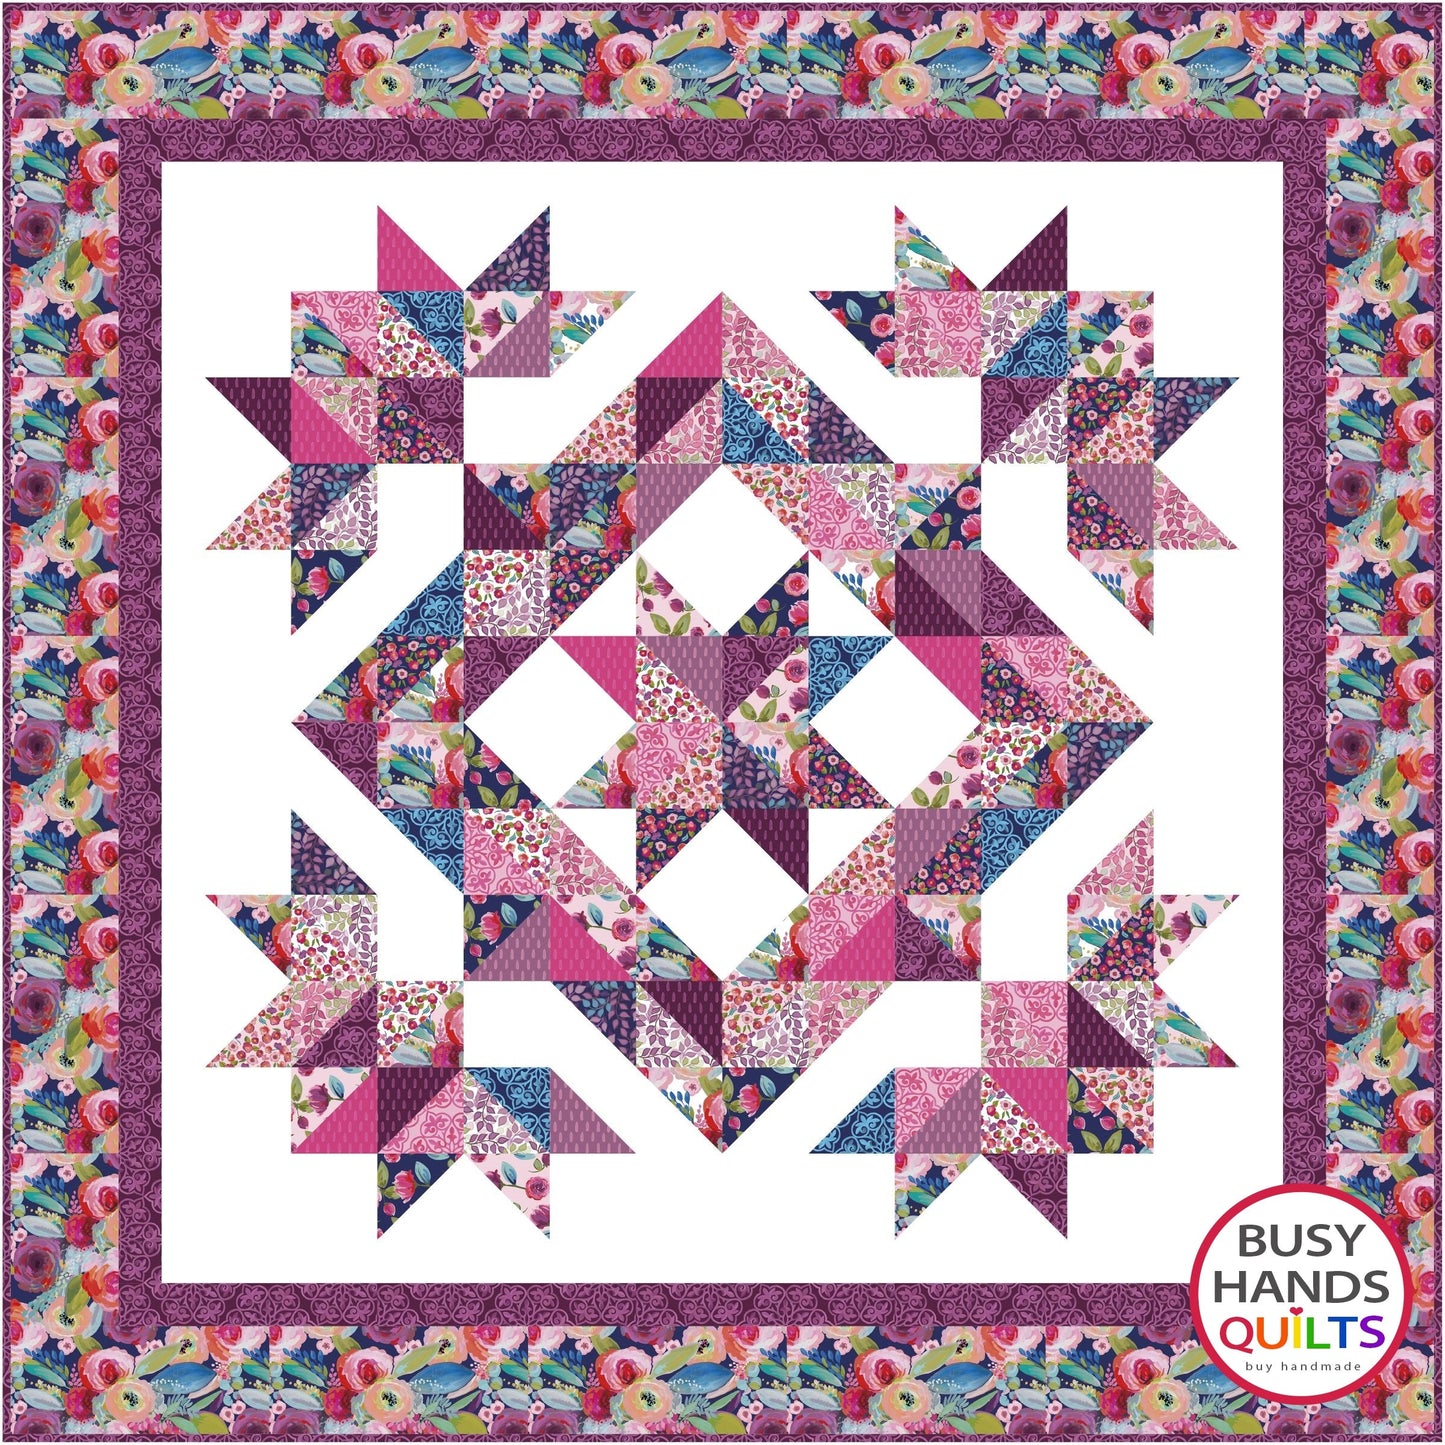 Whimsical Quilt Pattern PDF DOWNLOAD Busy Hands Quilts $12.99